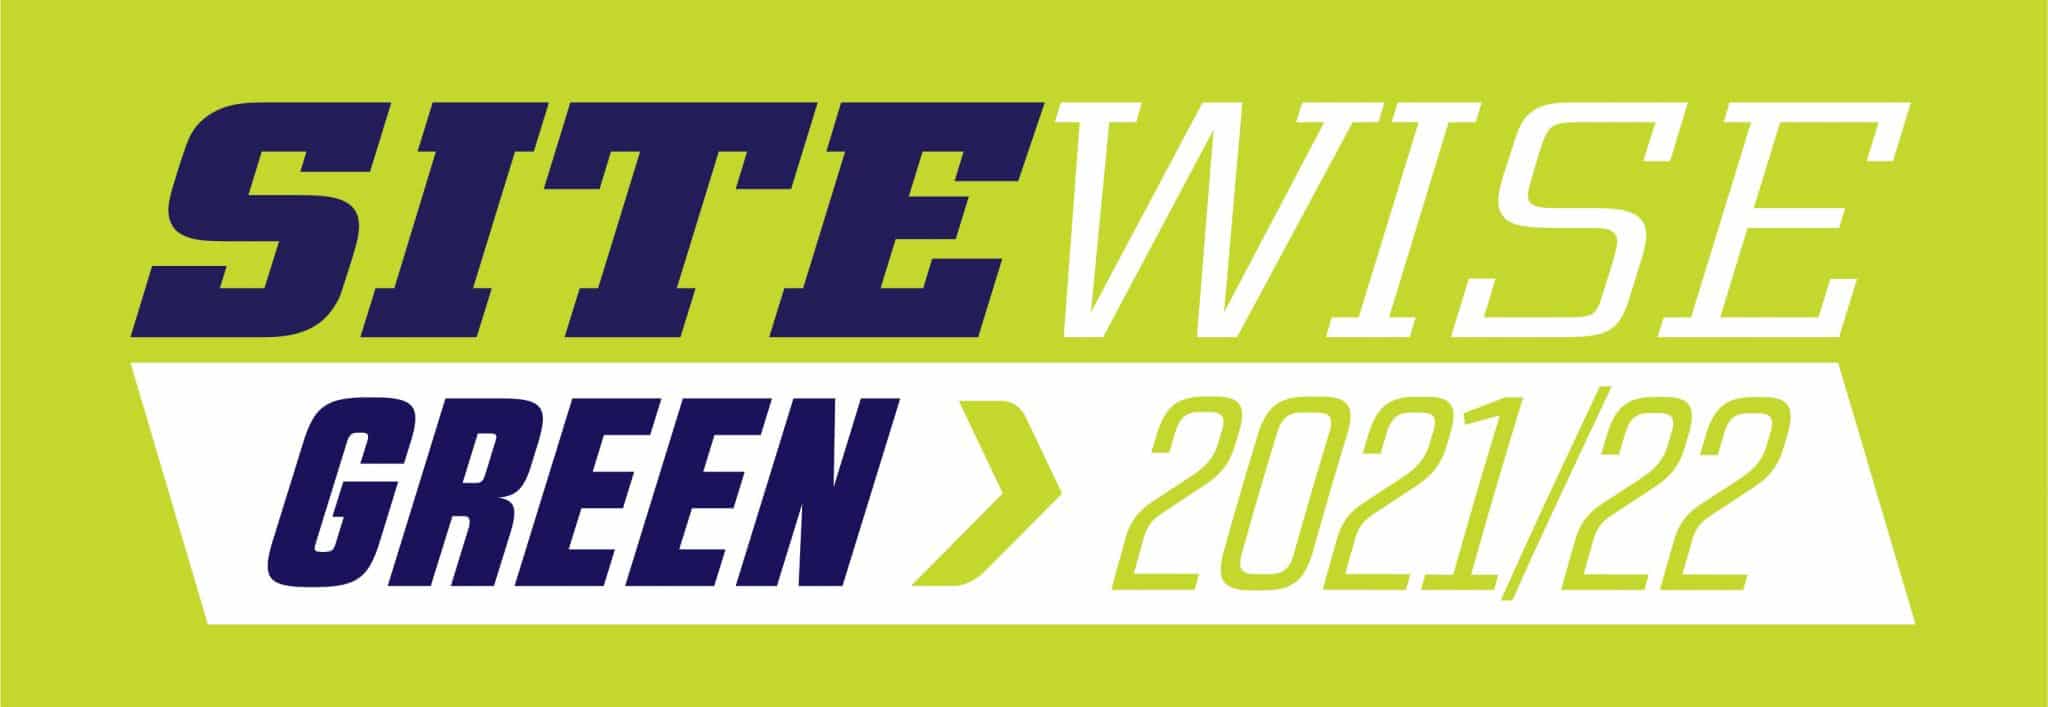 SiteWise-Green 2021-2022